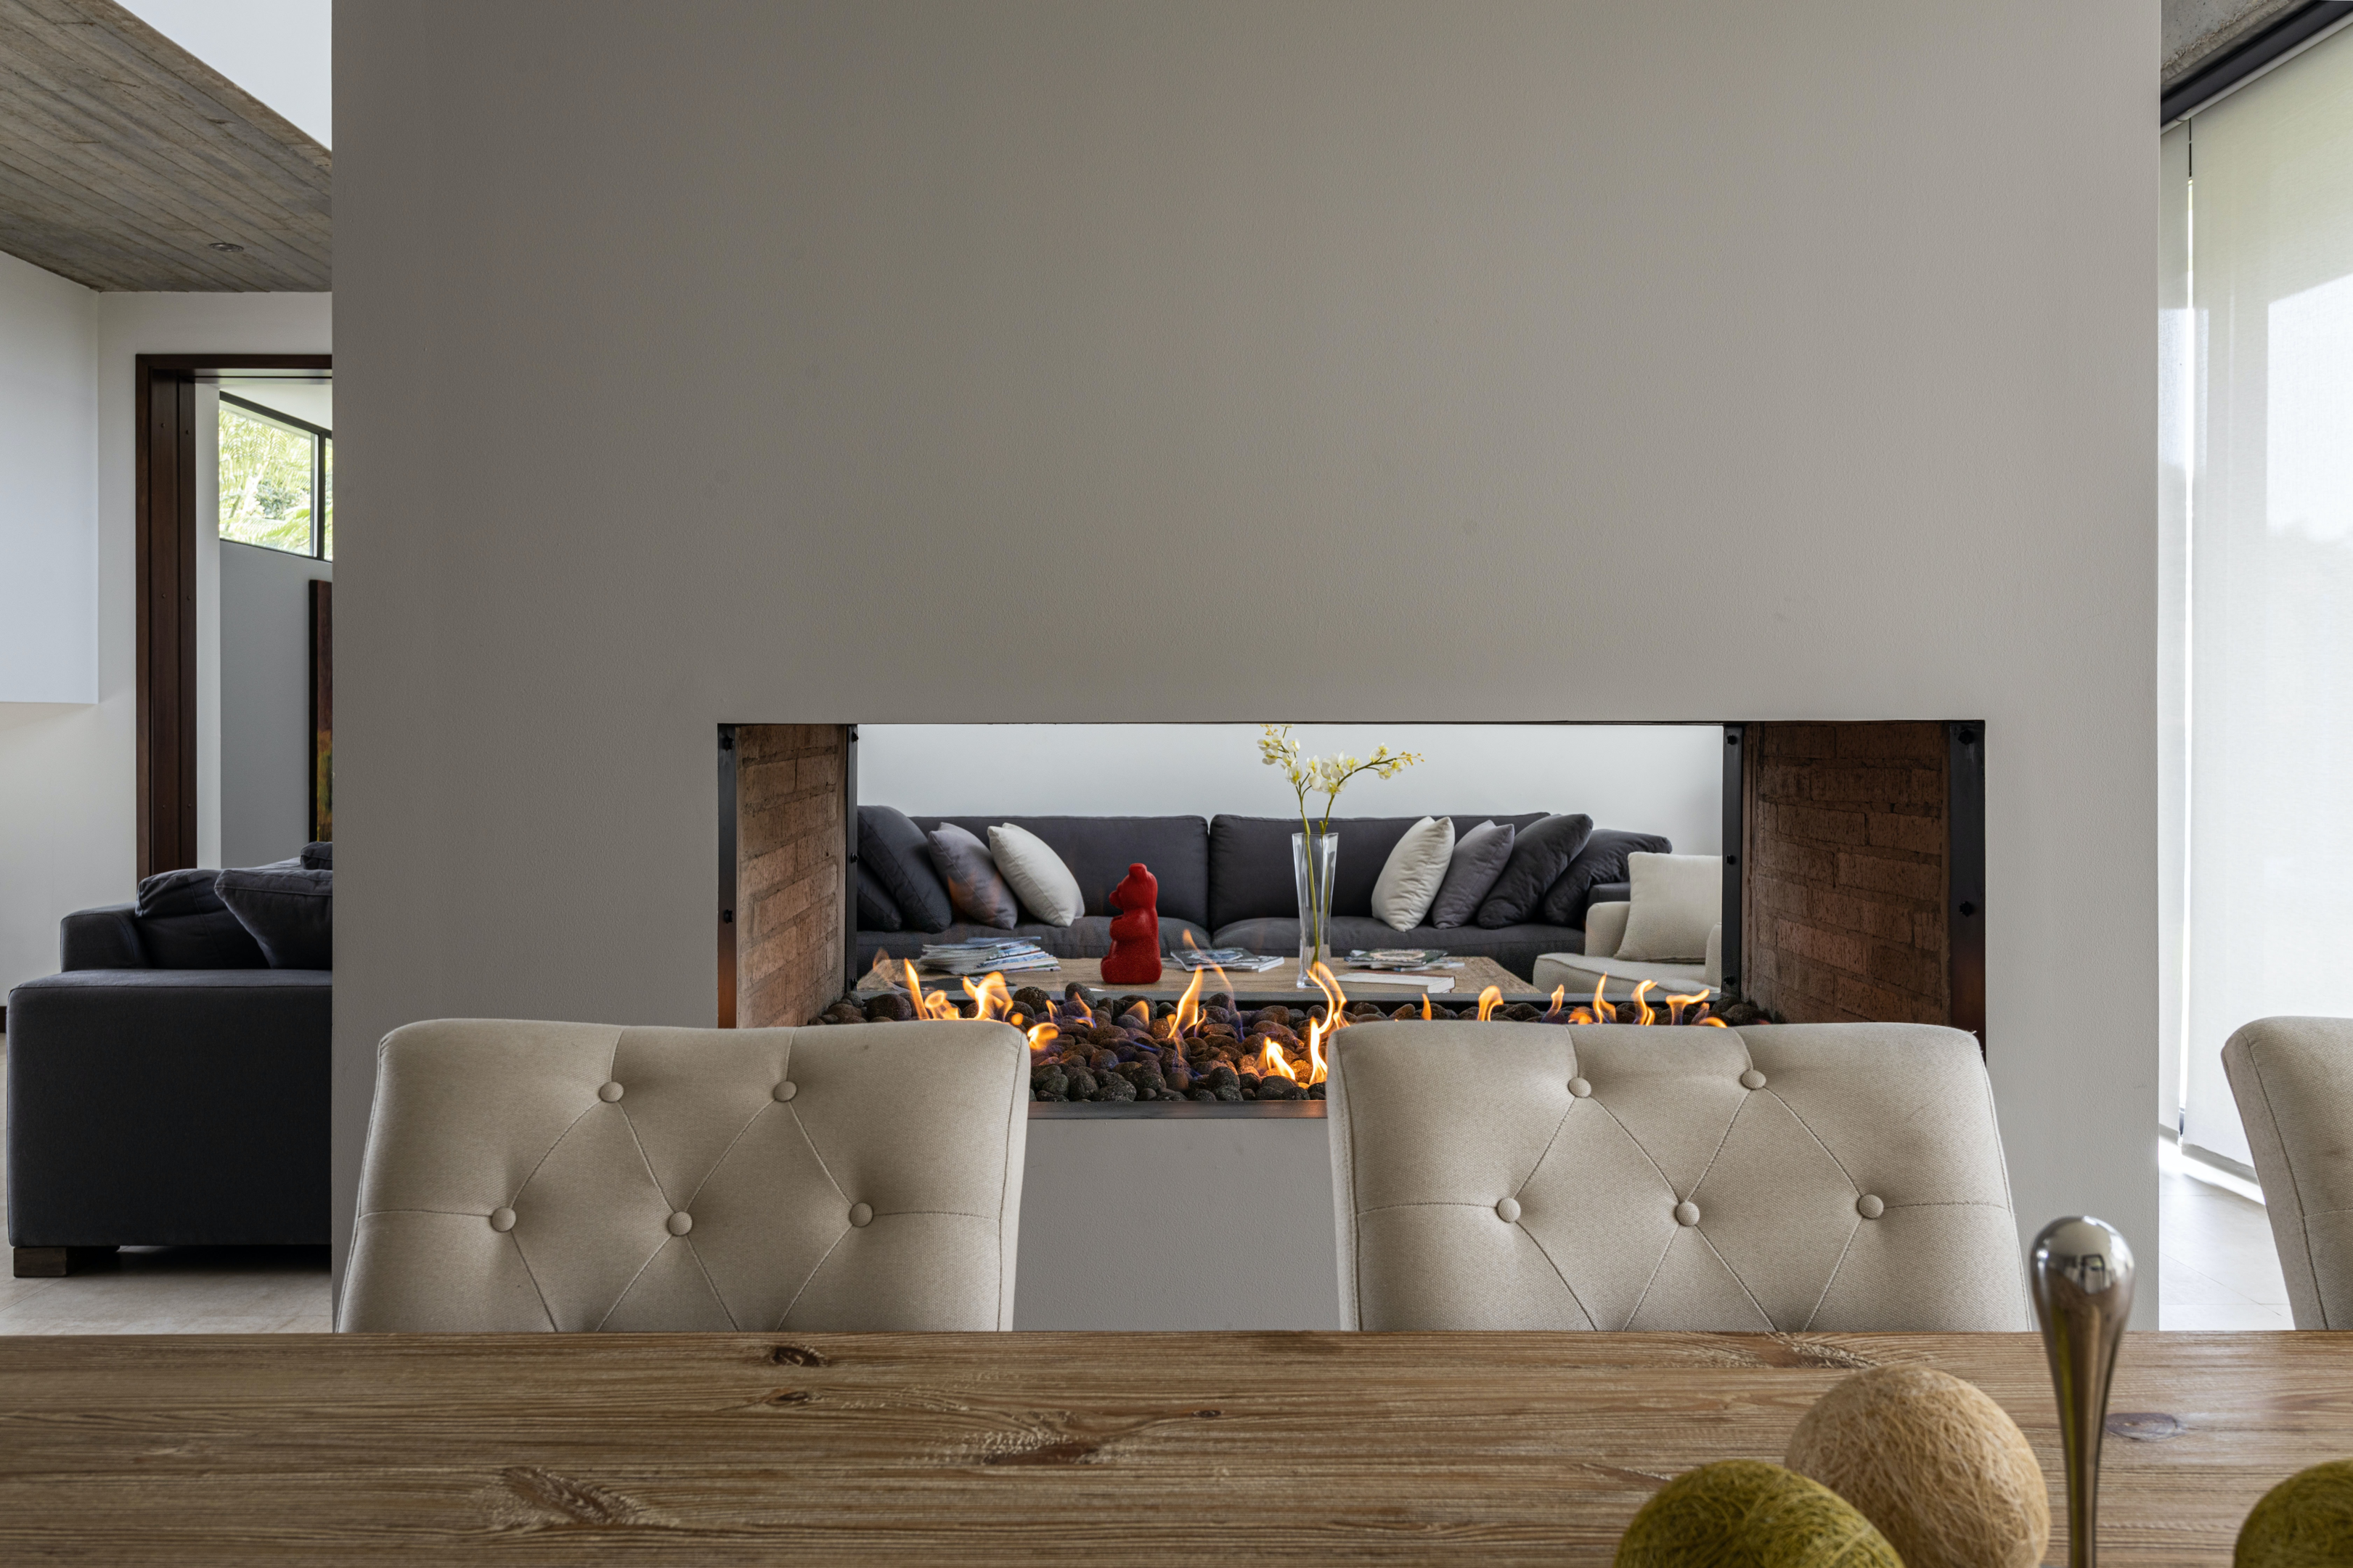 Photo by Gustavo Galeano Maz: https://www.pexels.com/photo/fireplace-between-a-living-room-and-a-dining-room-12951091/